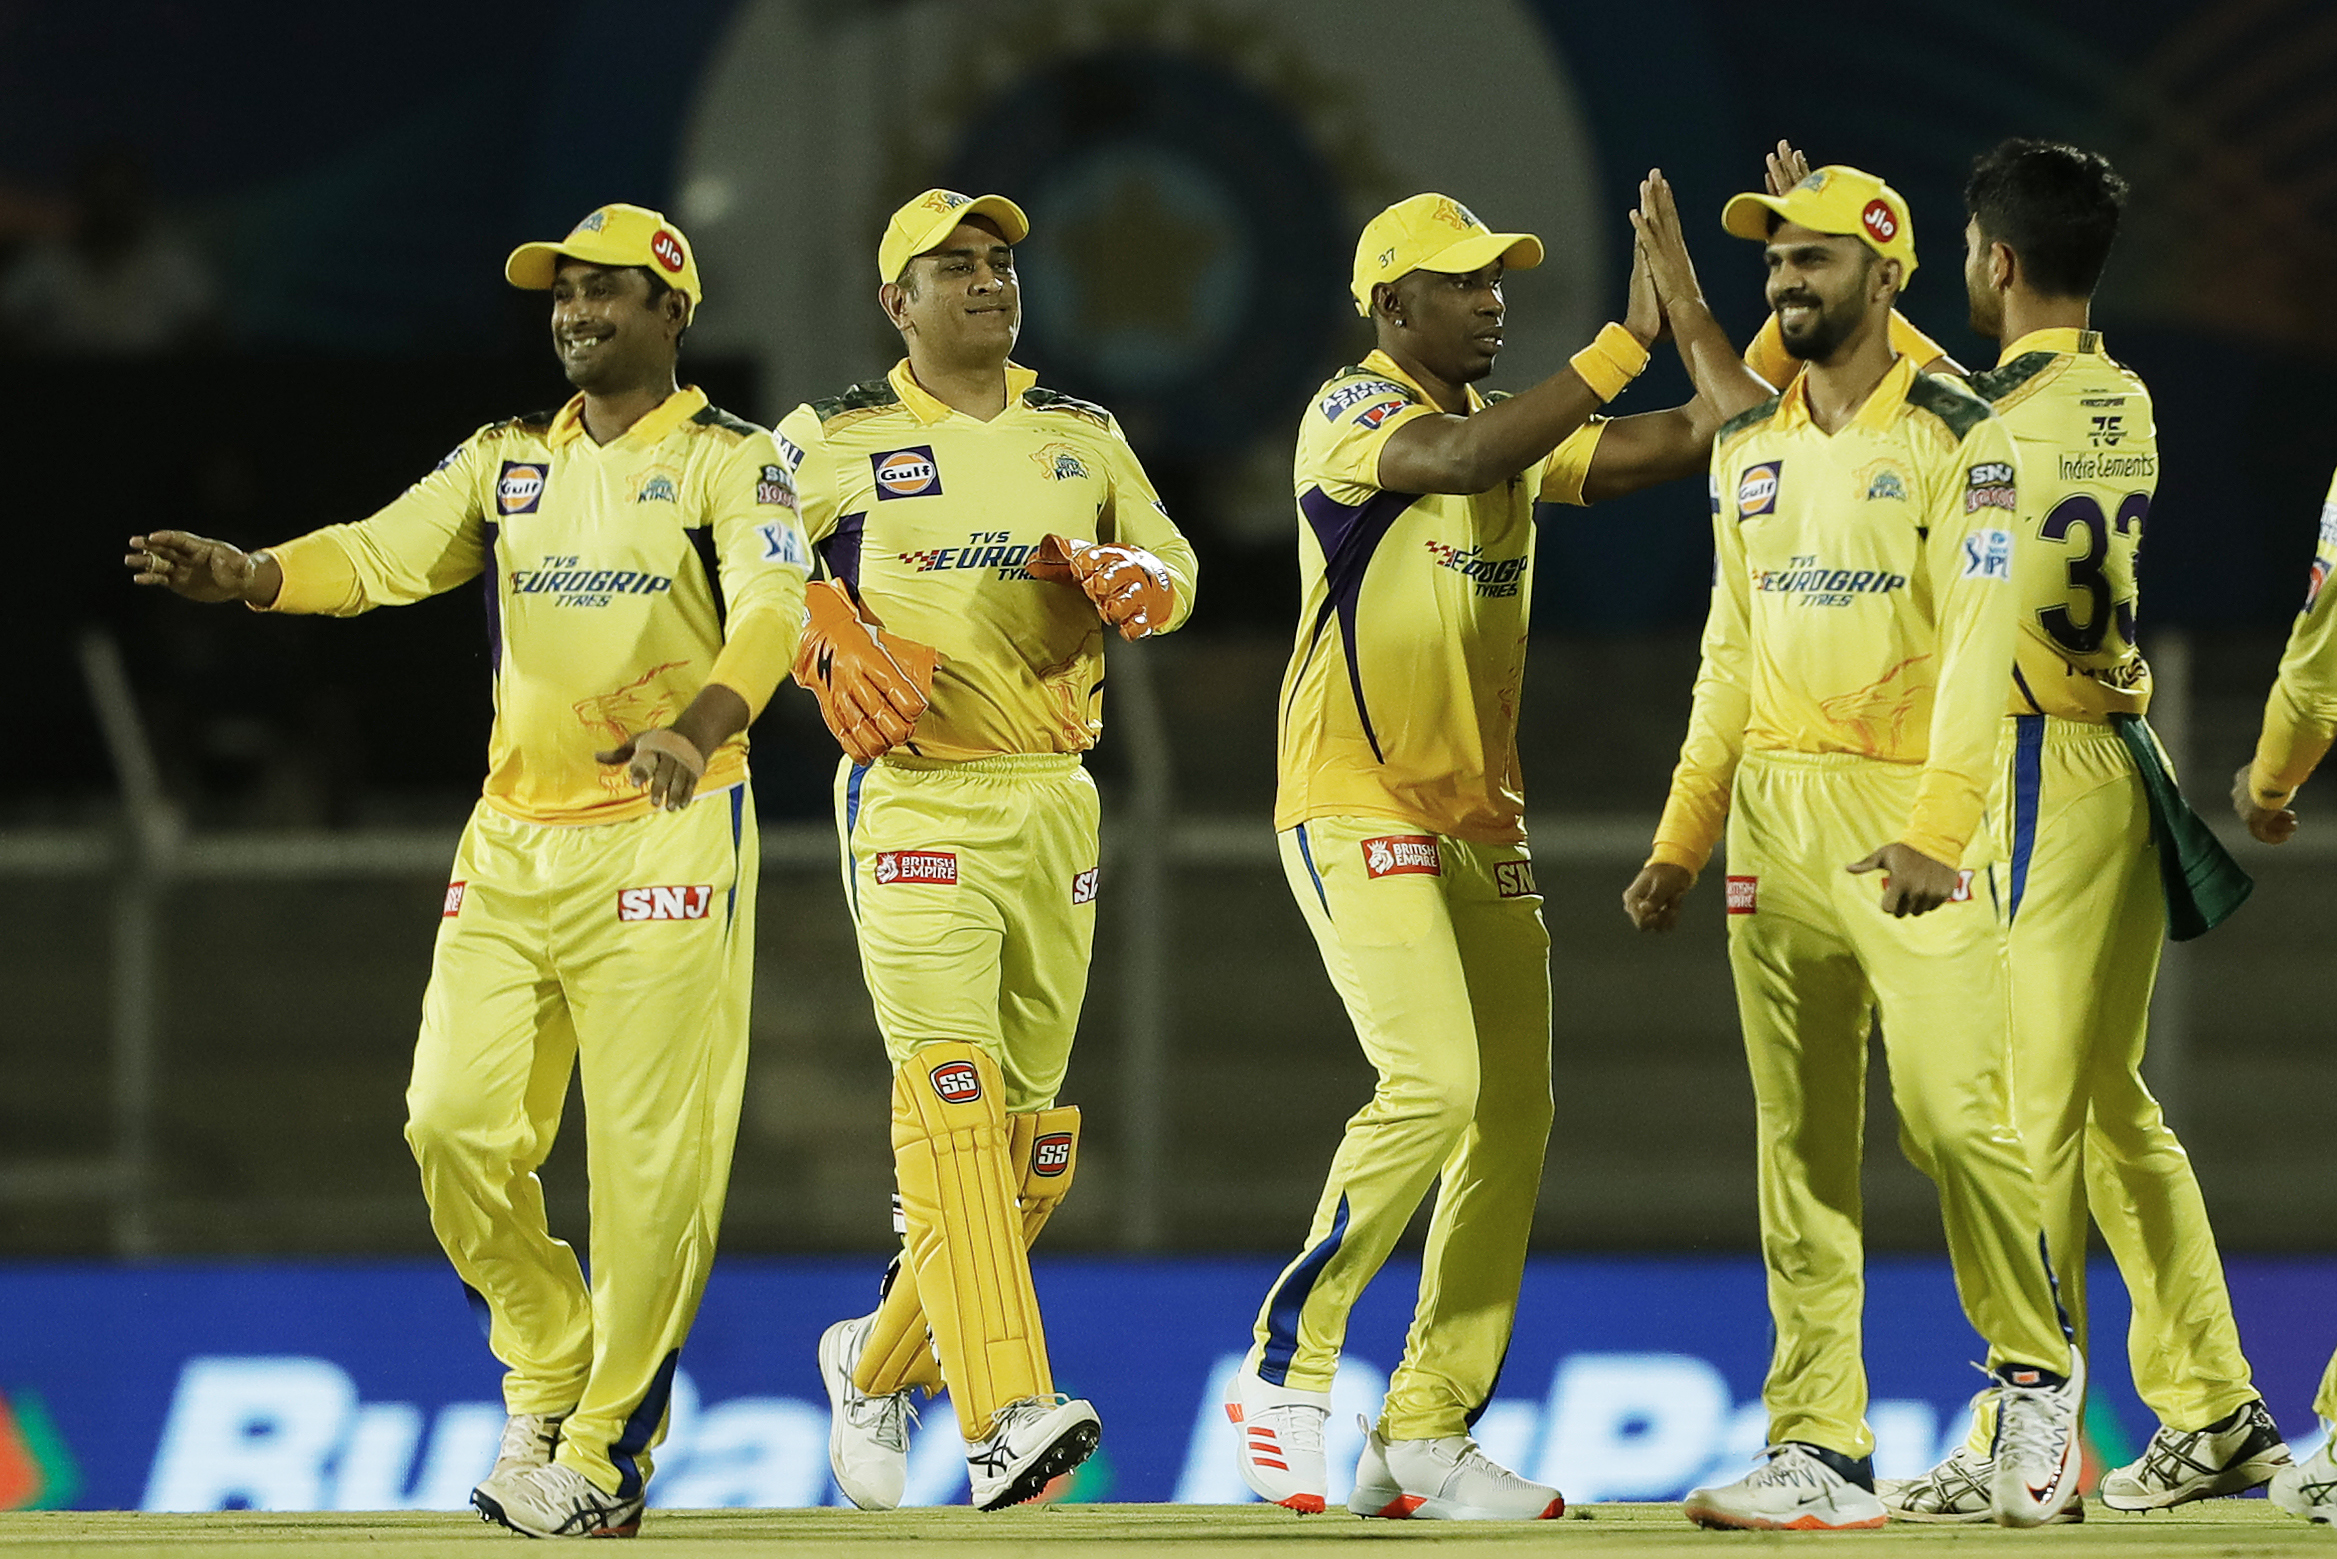 IPL 2022 | Chennai Super Kings vs Sunrisers Hyderabad- Preview, head to head, where to watch, and betting tips